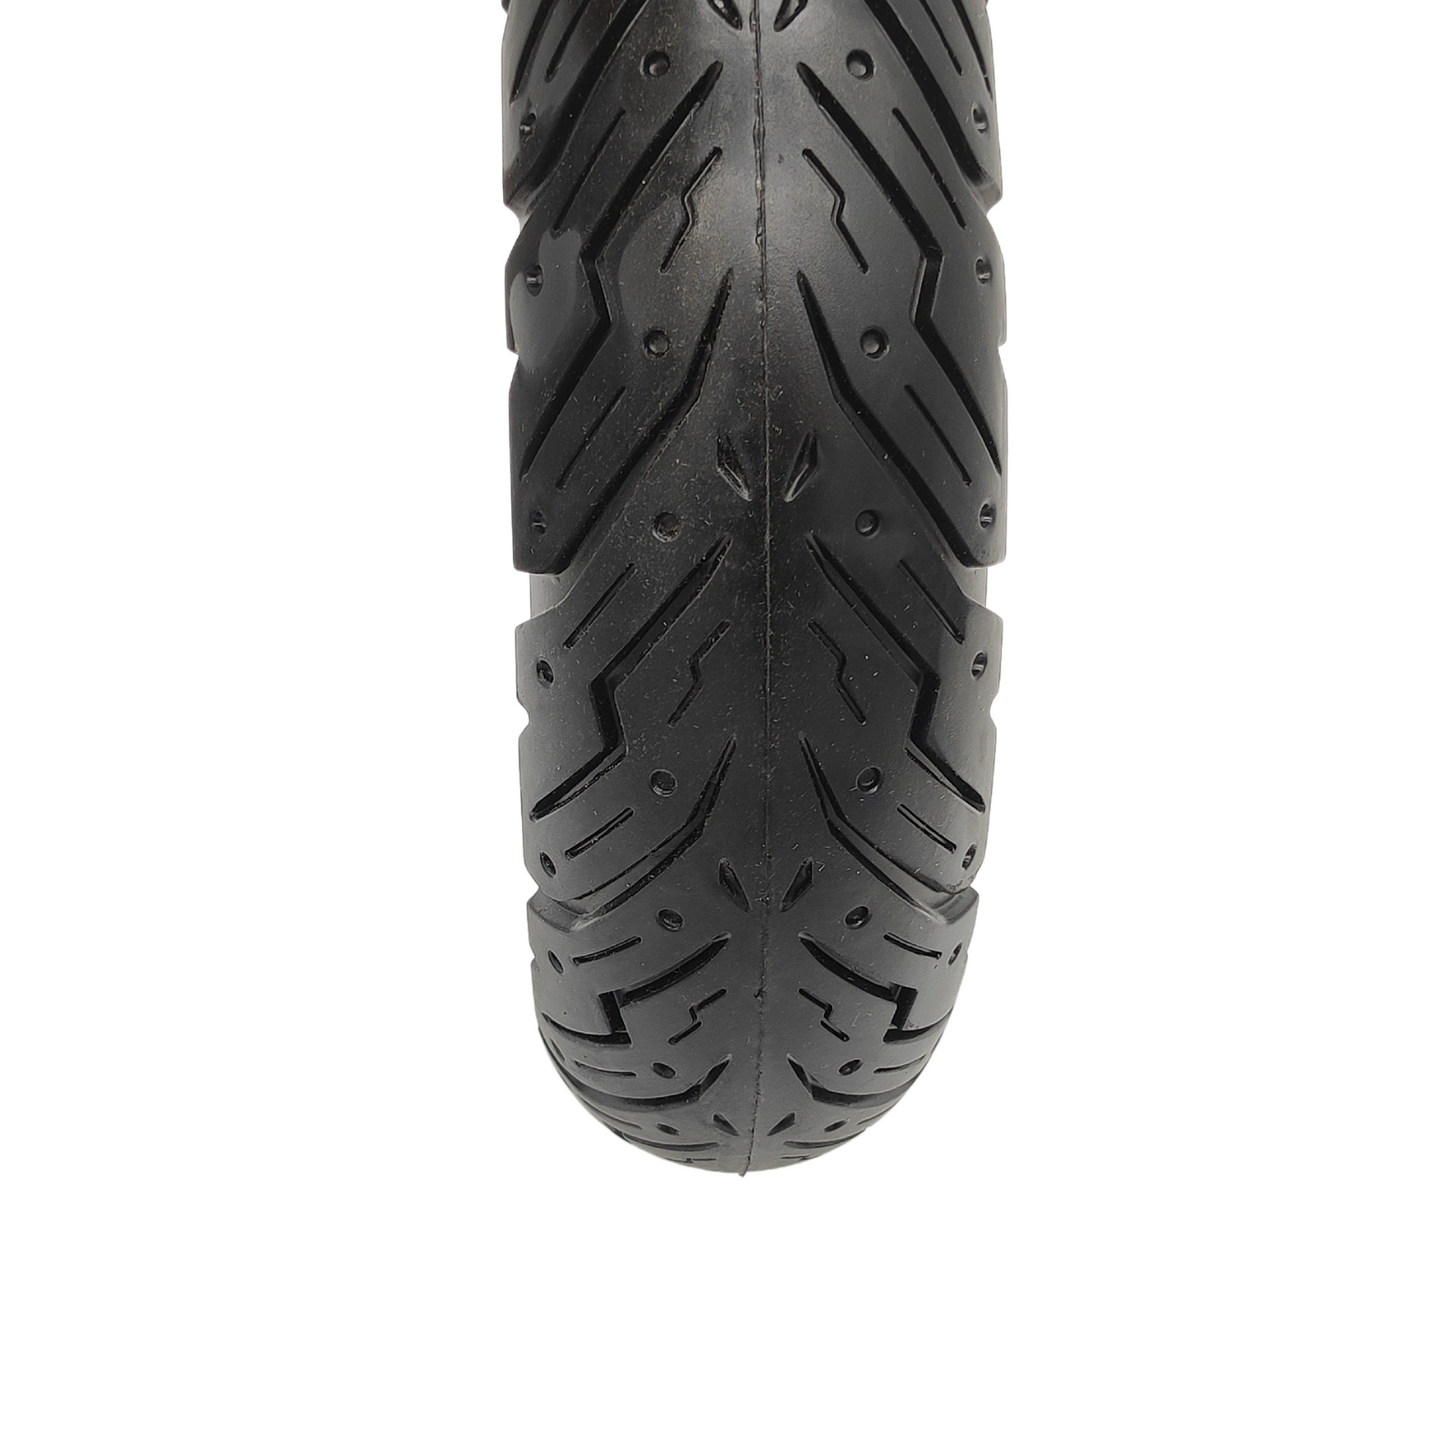 Ninebot Max G30 G30L massief rubberen band 10x2.5 60/70-6.5 44mm voor e-scooters